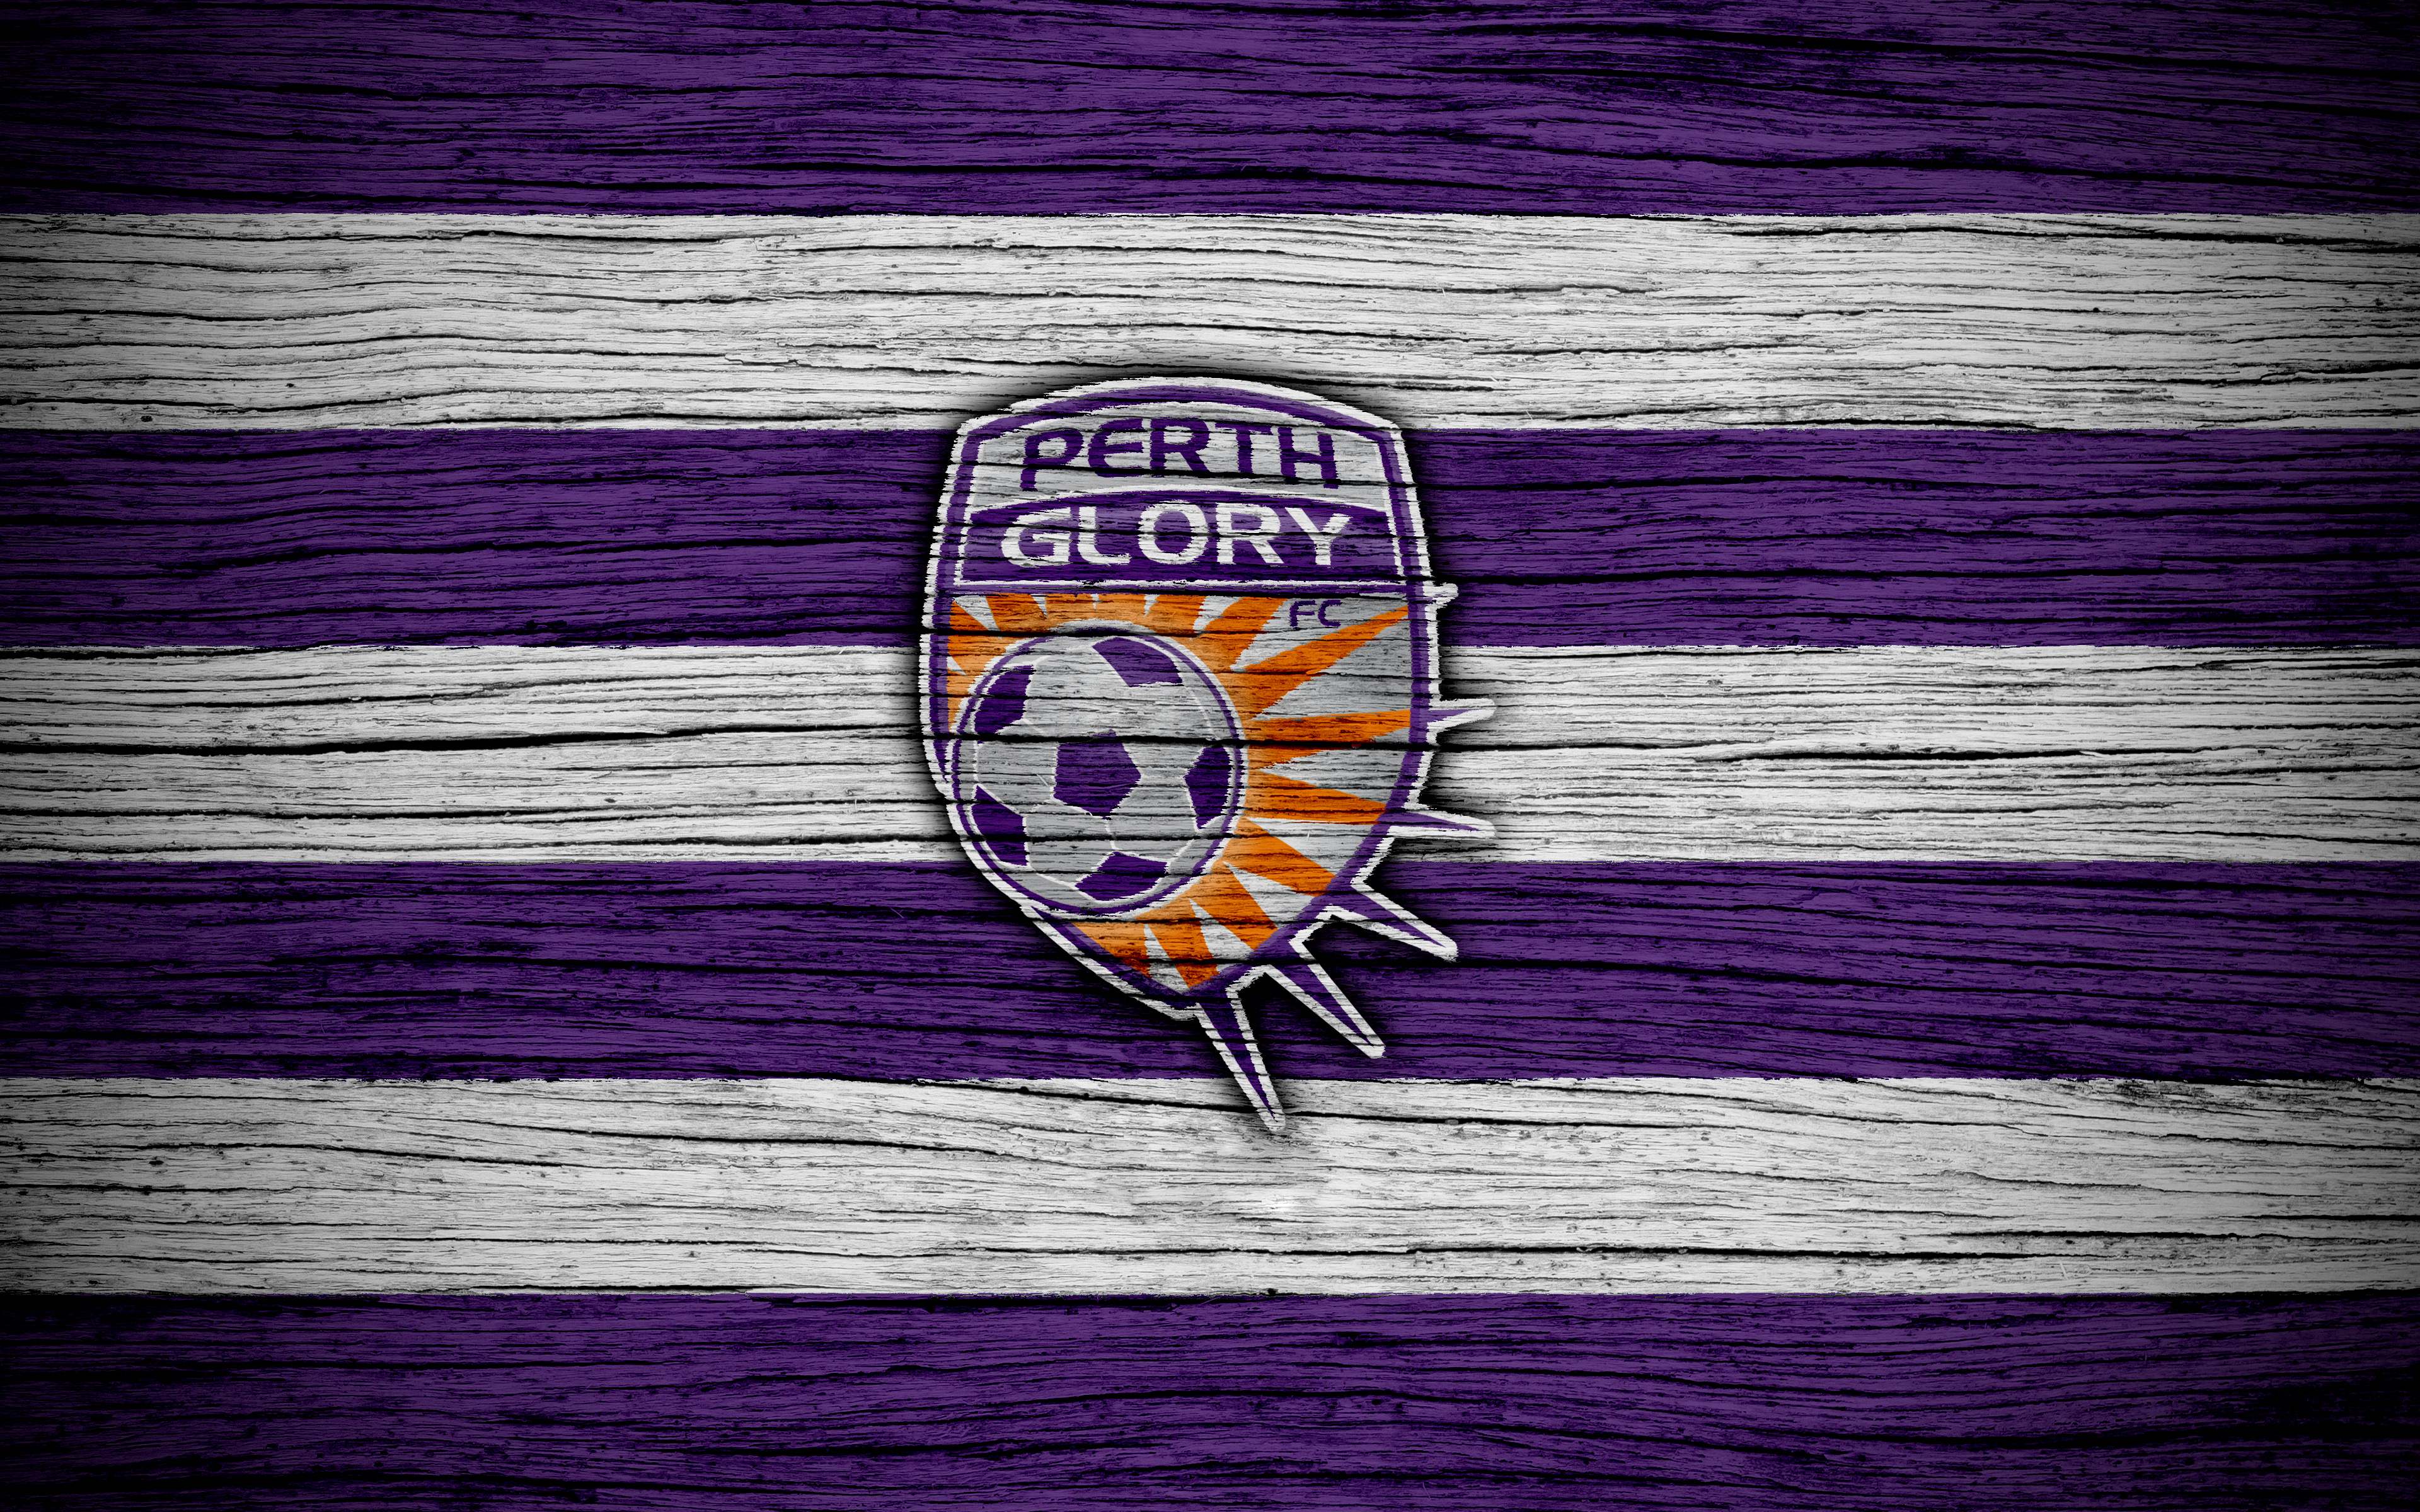 Perth Glory Fc Wallpapers